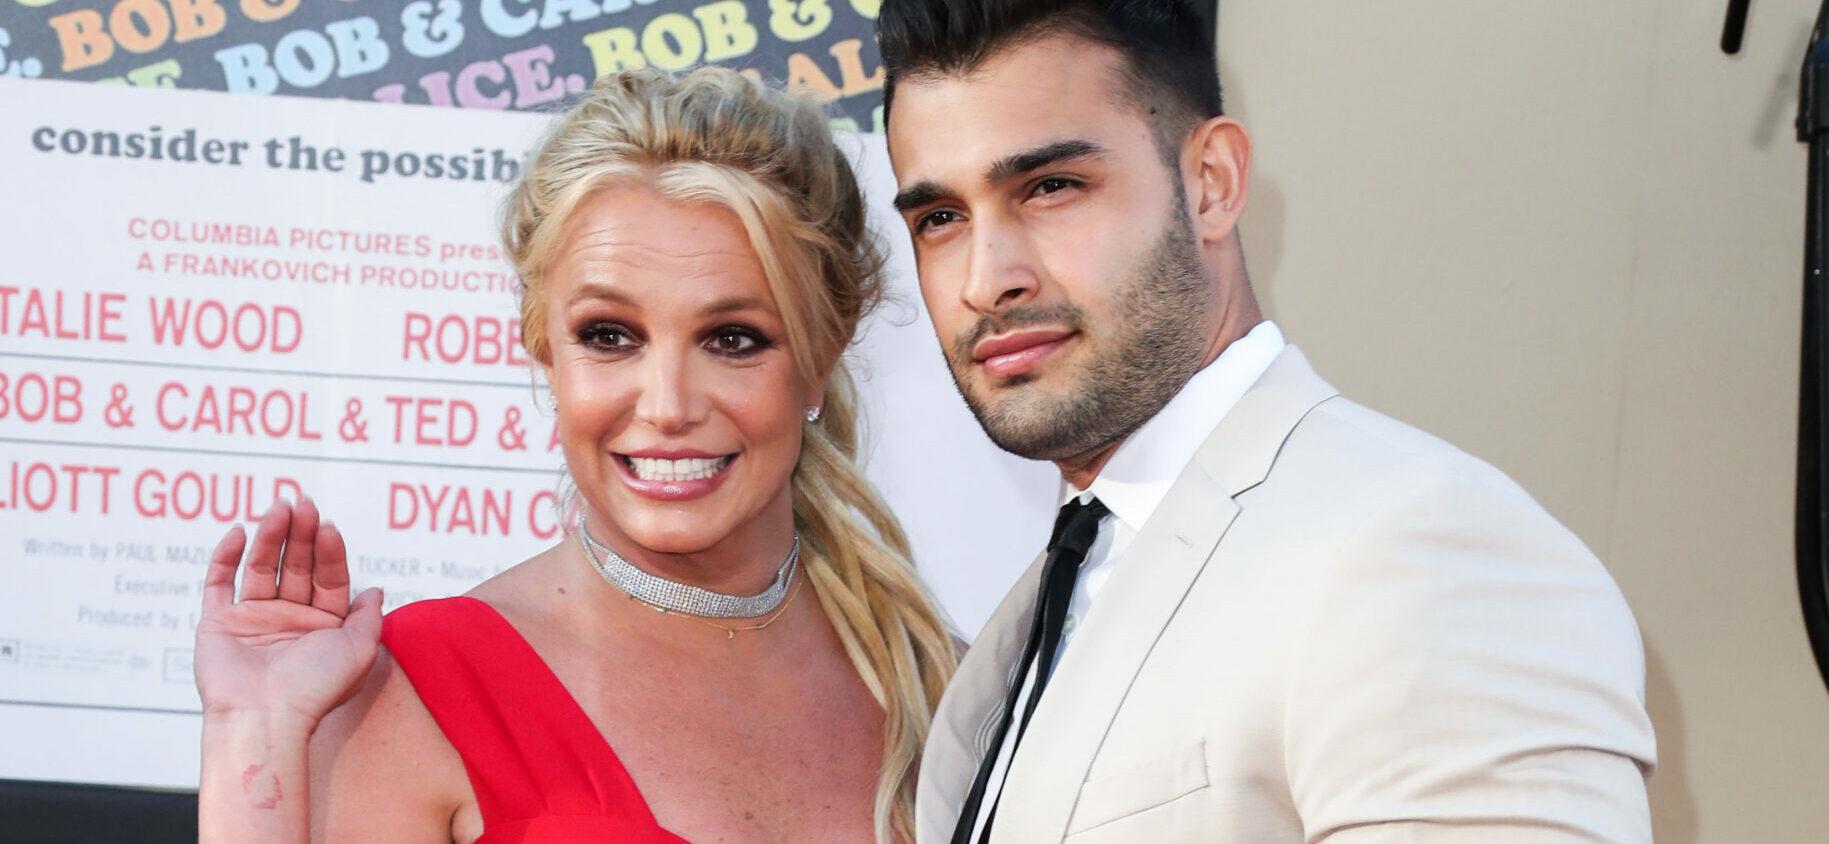 Sam Asghari Shows Britney Spears Interacting With Fans: ‘This Is How You Treat People’